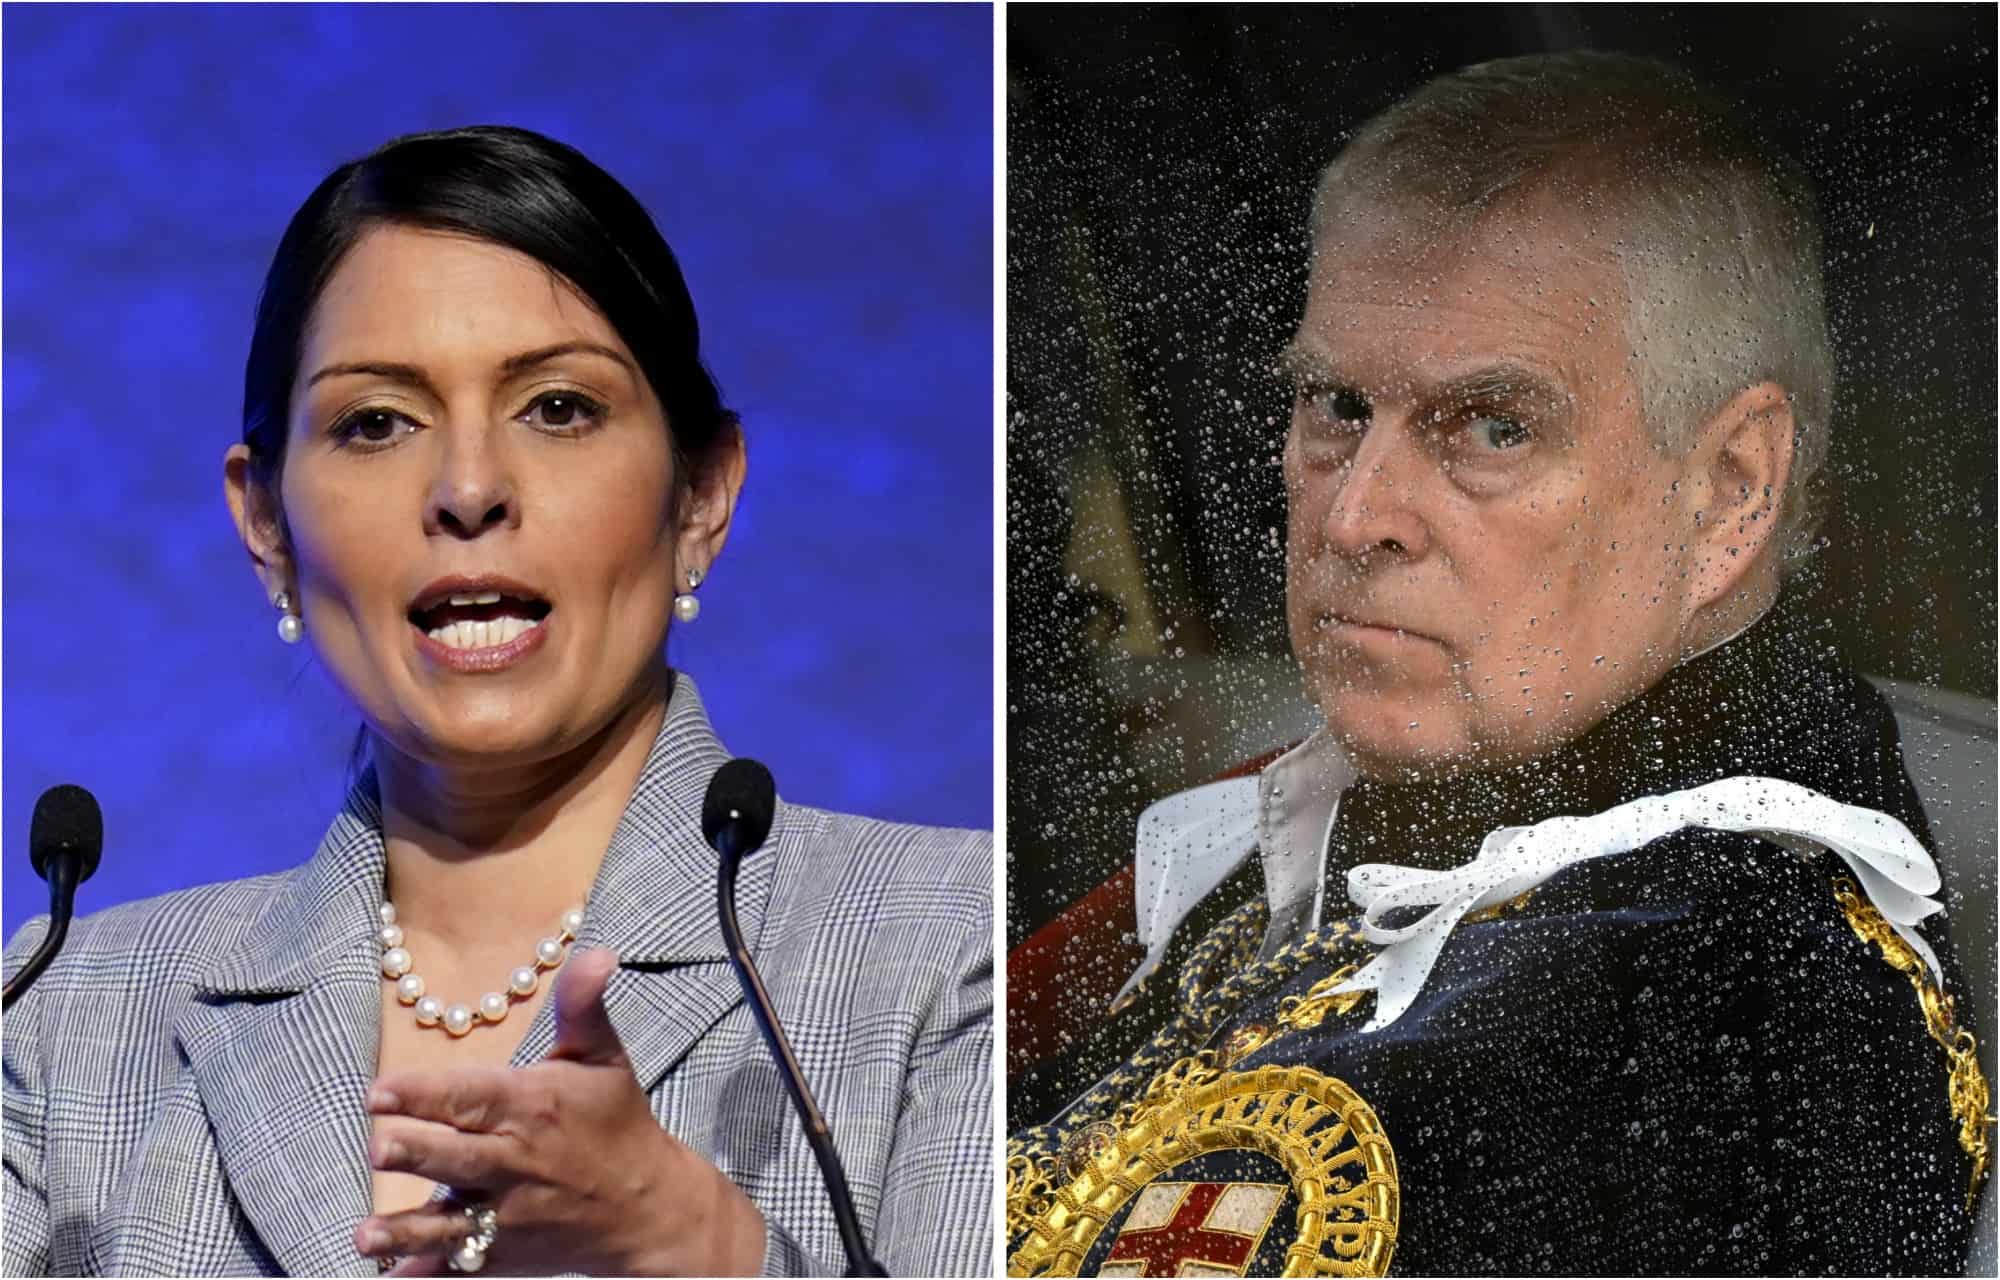 Priti Patel ‘apologises to King’ for email about Prince Andrew